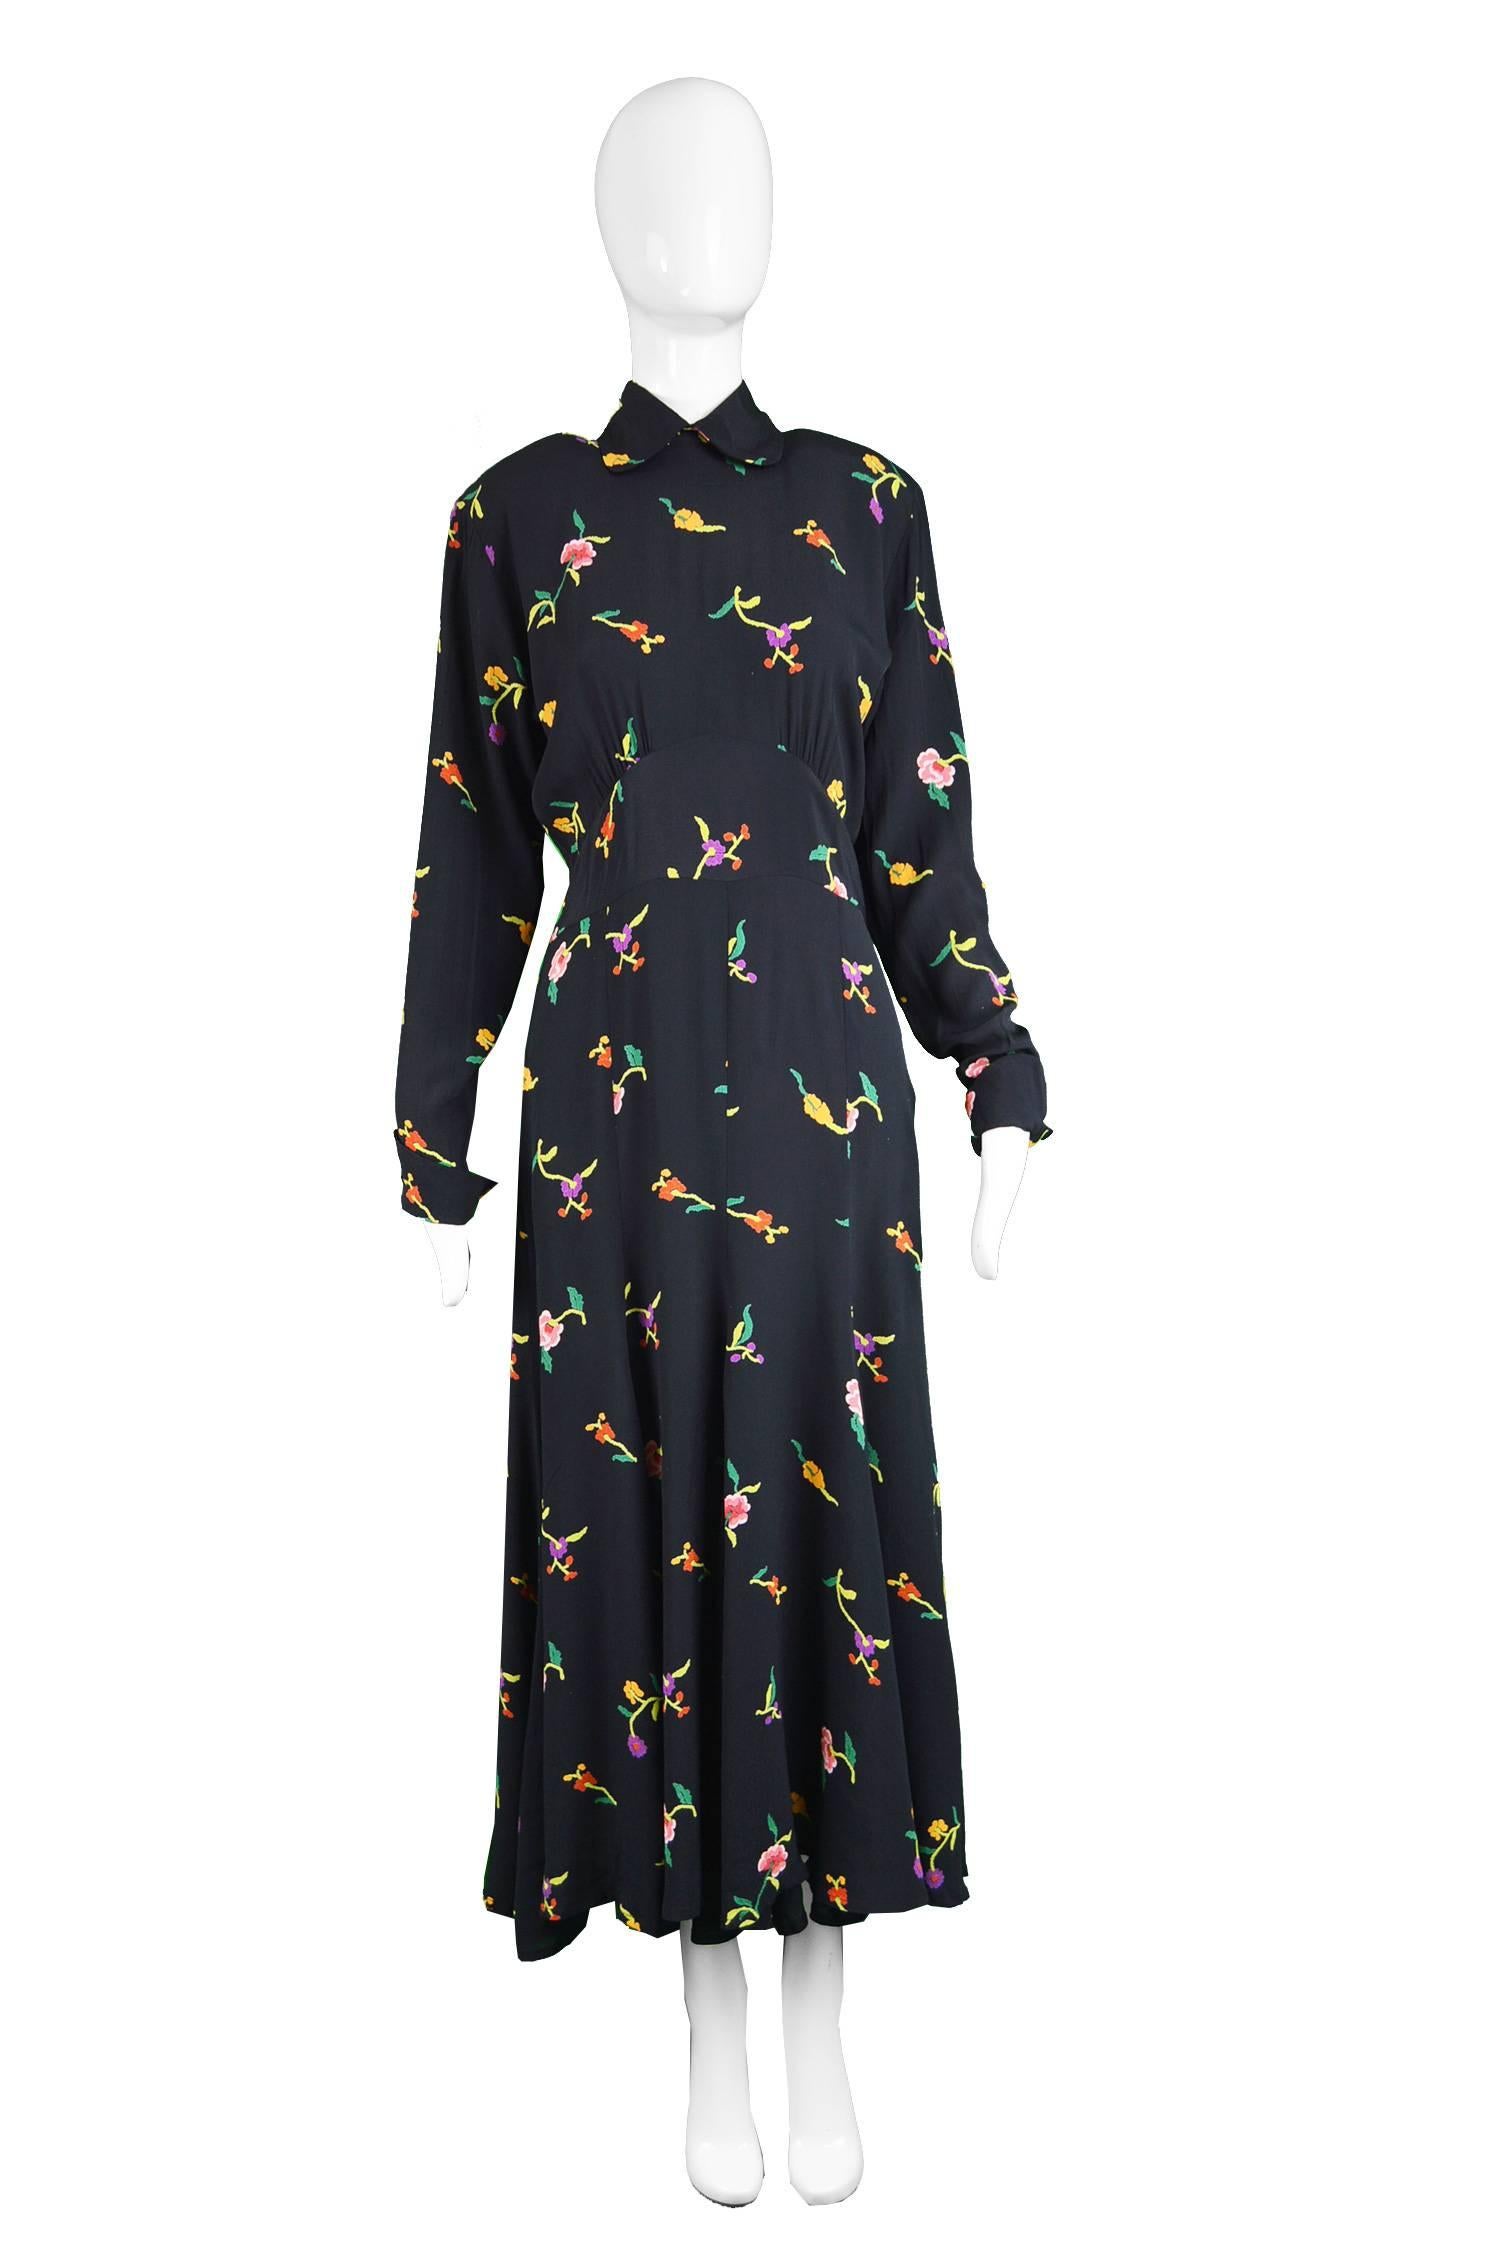 A stunning vintage Norma Kamali dress from the 80s in a black rayon crepe which has incredible drape, with a feminine, chinoiserie inspired floral print that looks almost like embroidery from a distance. The bold shoulder pads mixed with the drape